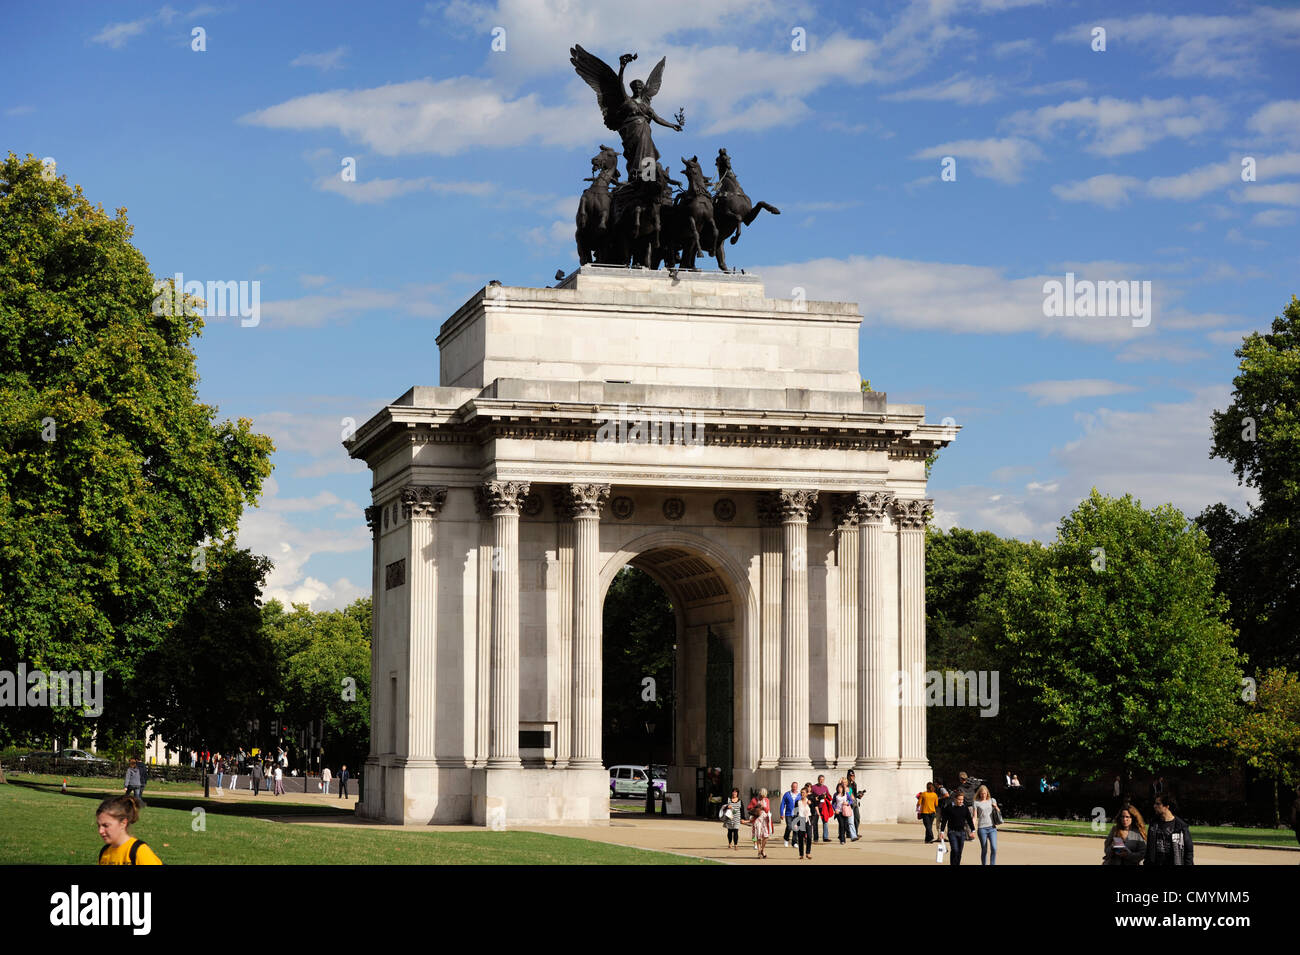 United Kingdom, London, Hyde Park Corner, Wellington Arch is a Triumphal Arch commissioned by King George IV in 1825 to Stock Photo